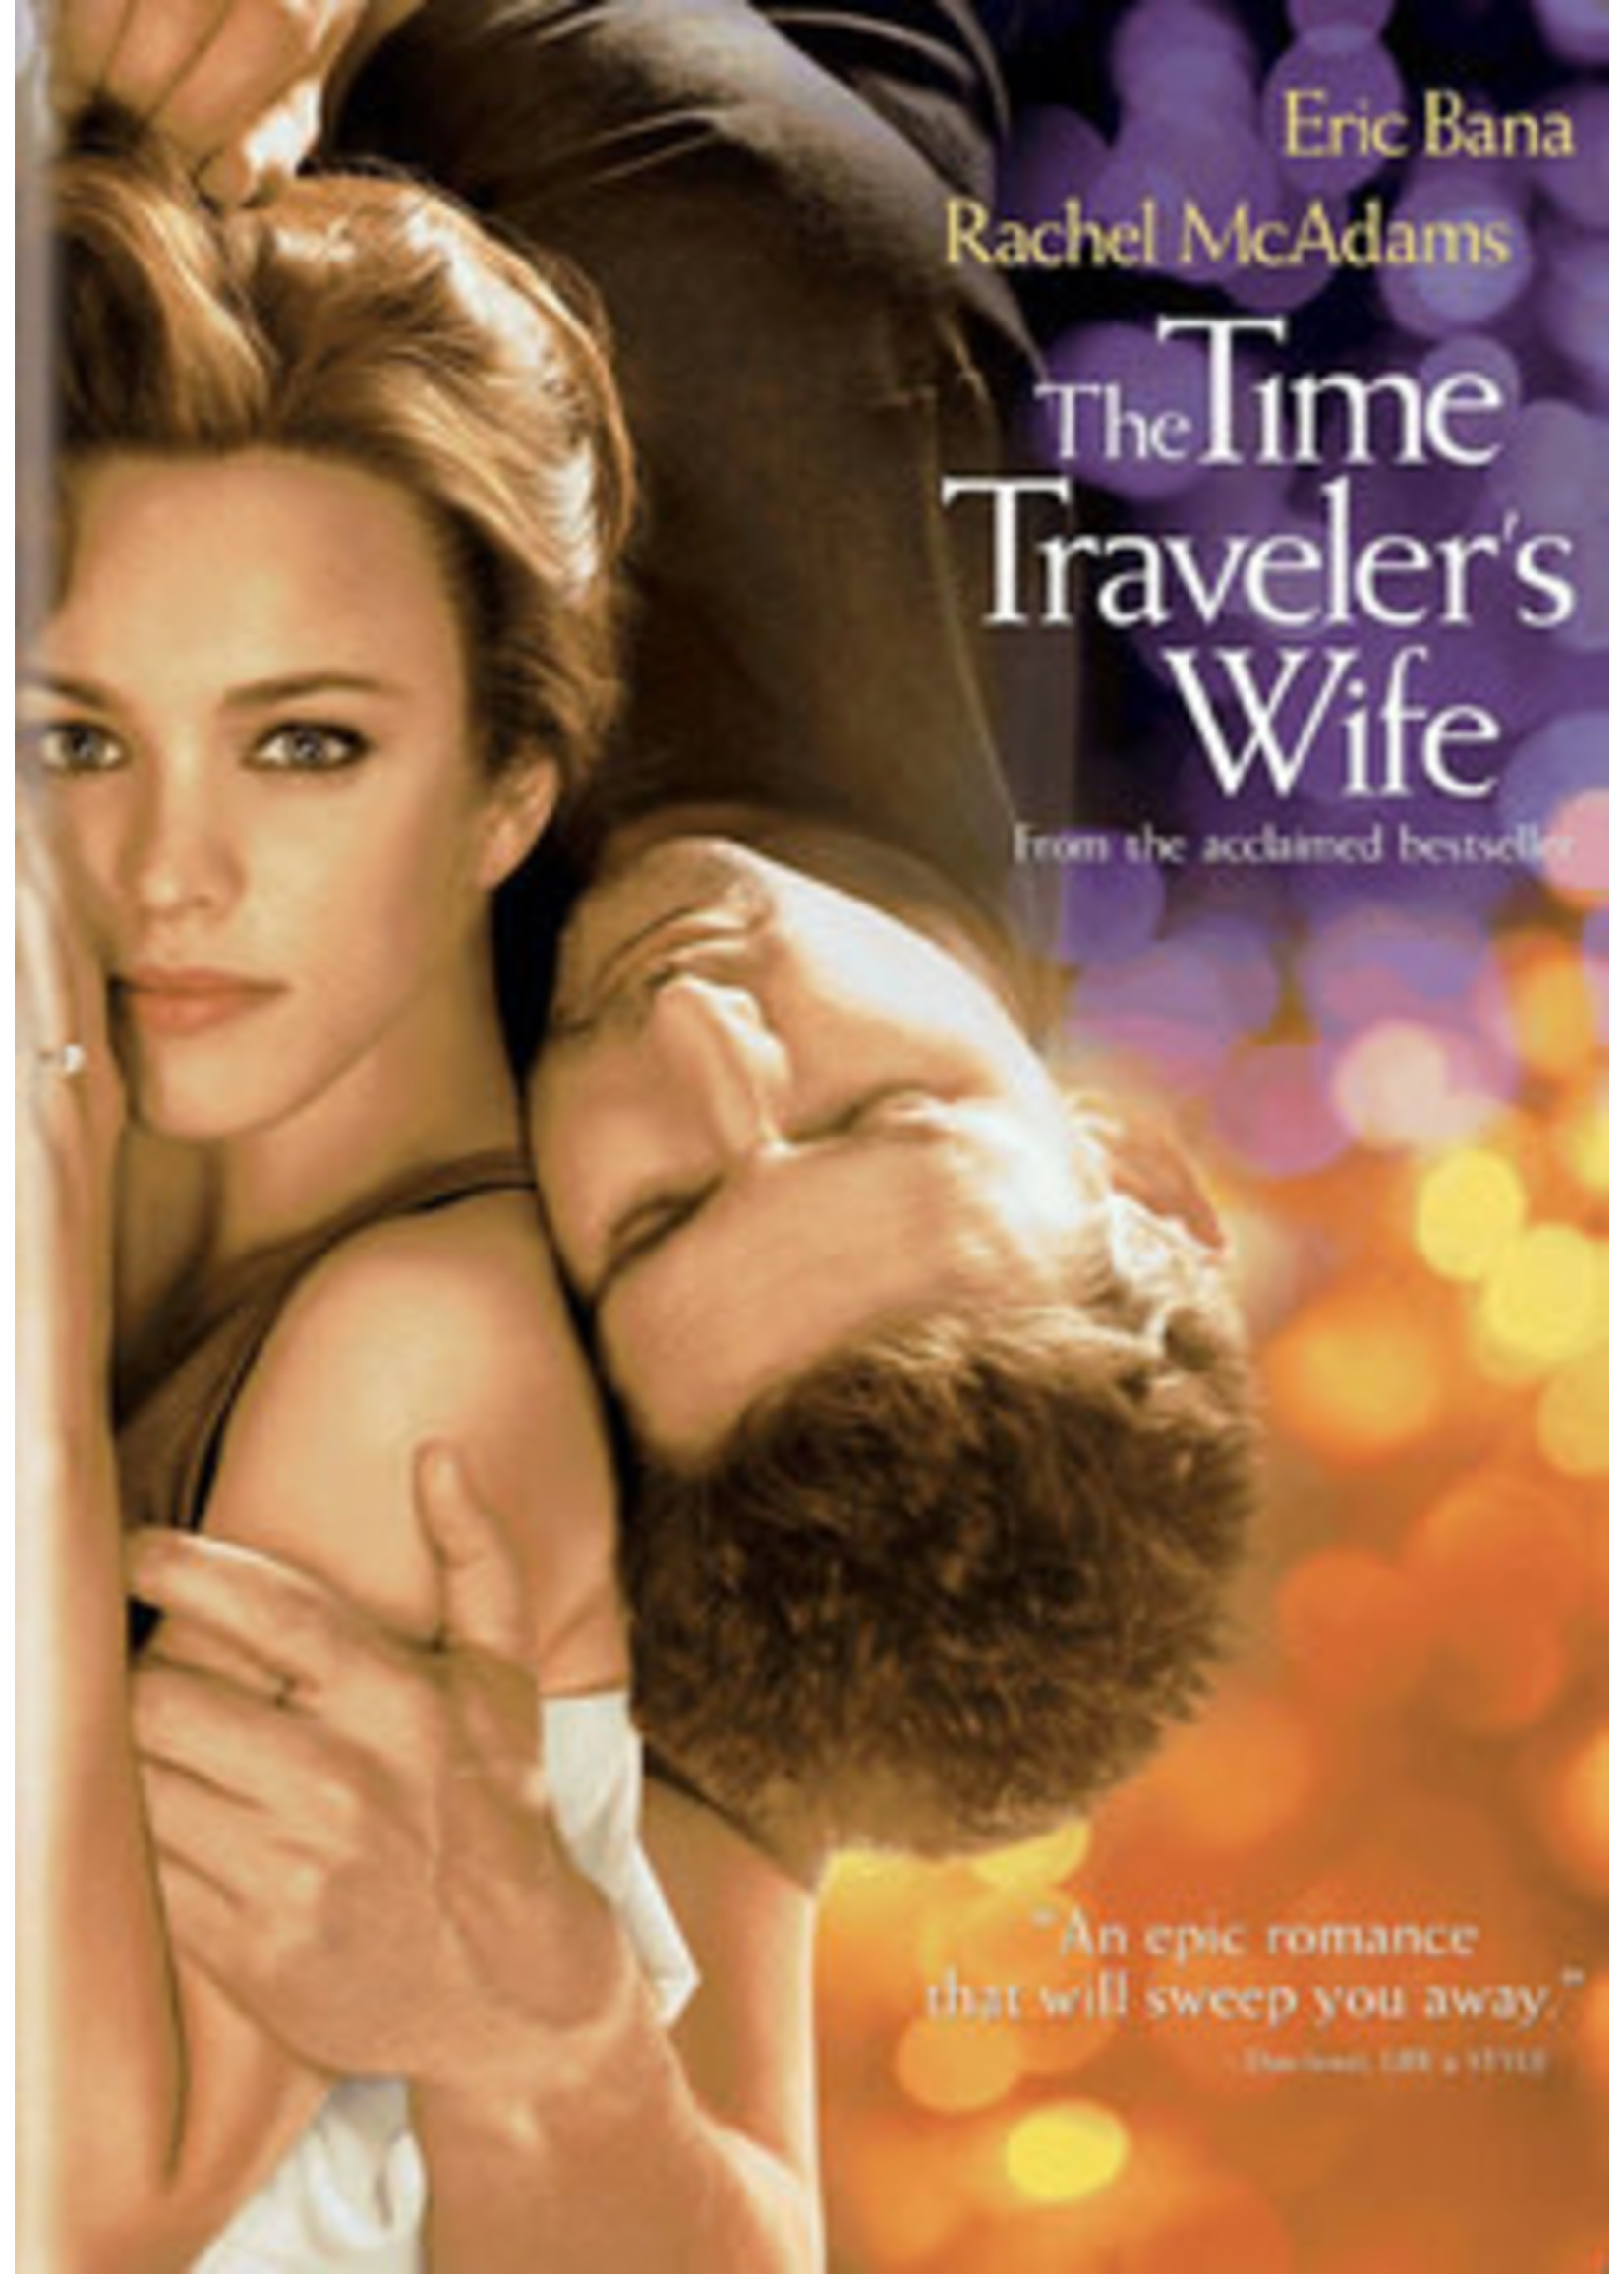 The Time Traveler's Wife (DVD)